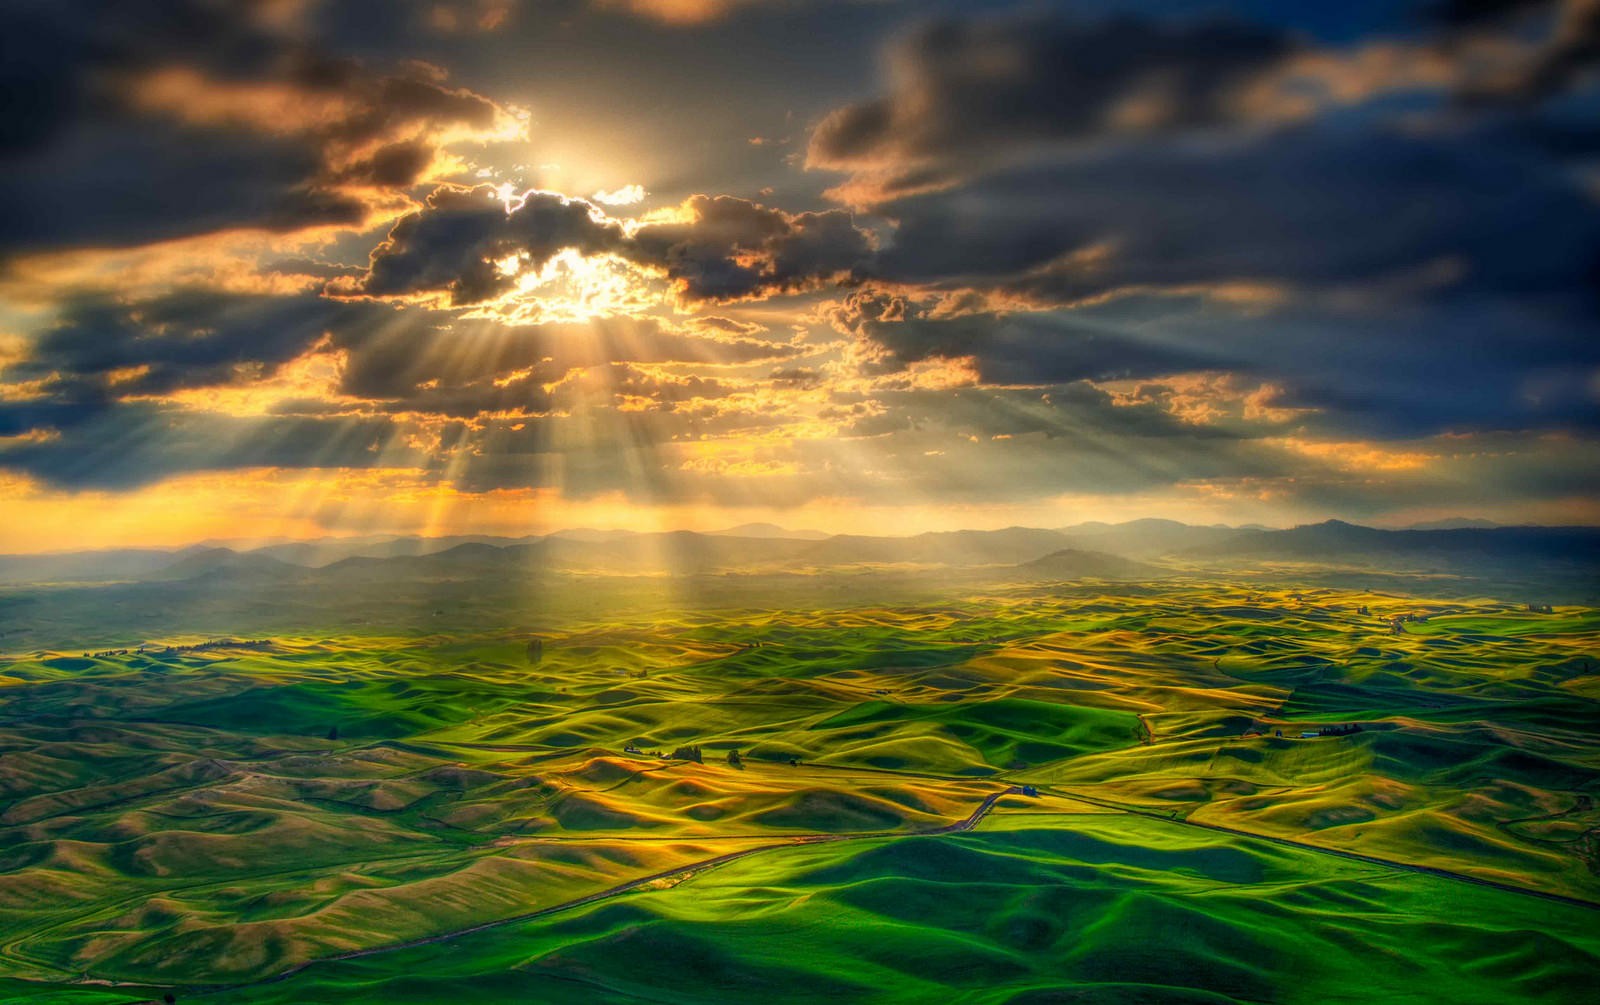 General 1600x1005 photography nature sun rays clouds mountains far view hills ground field sunlight landscape